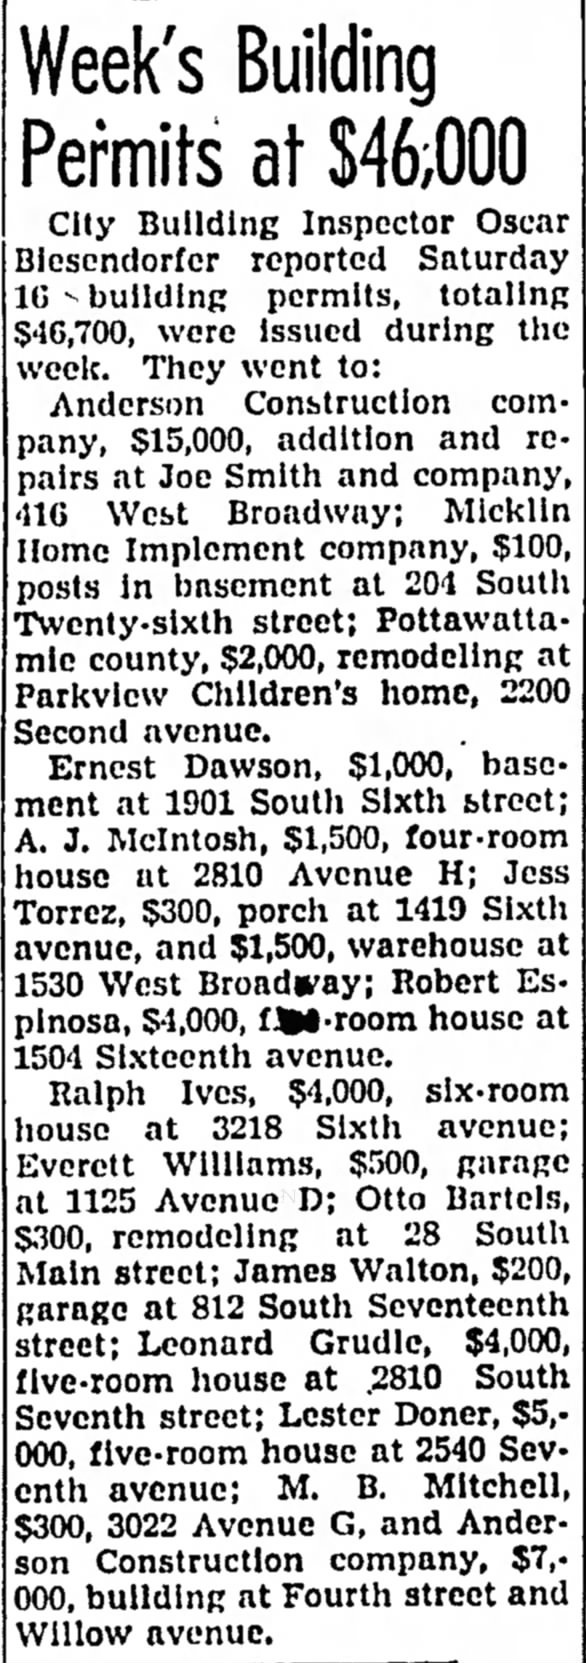 Week's Building Permits at $46,000 - Council Bluffs Nonpareil - 11 Apr 1948, page 24